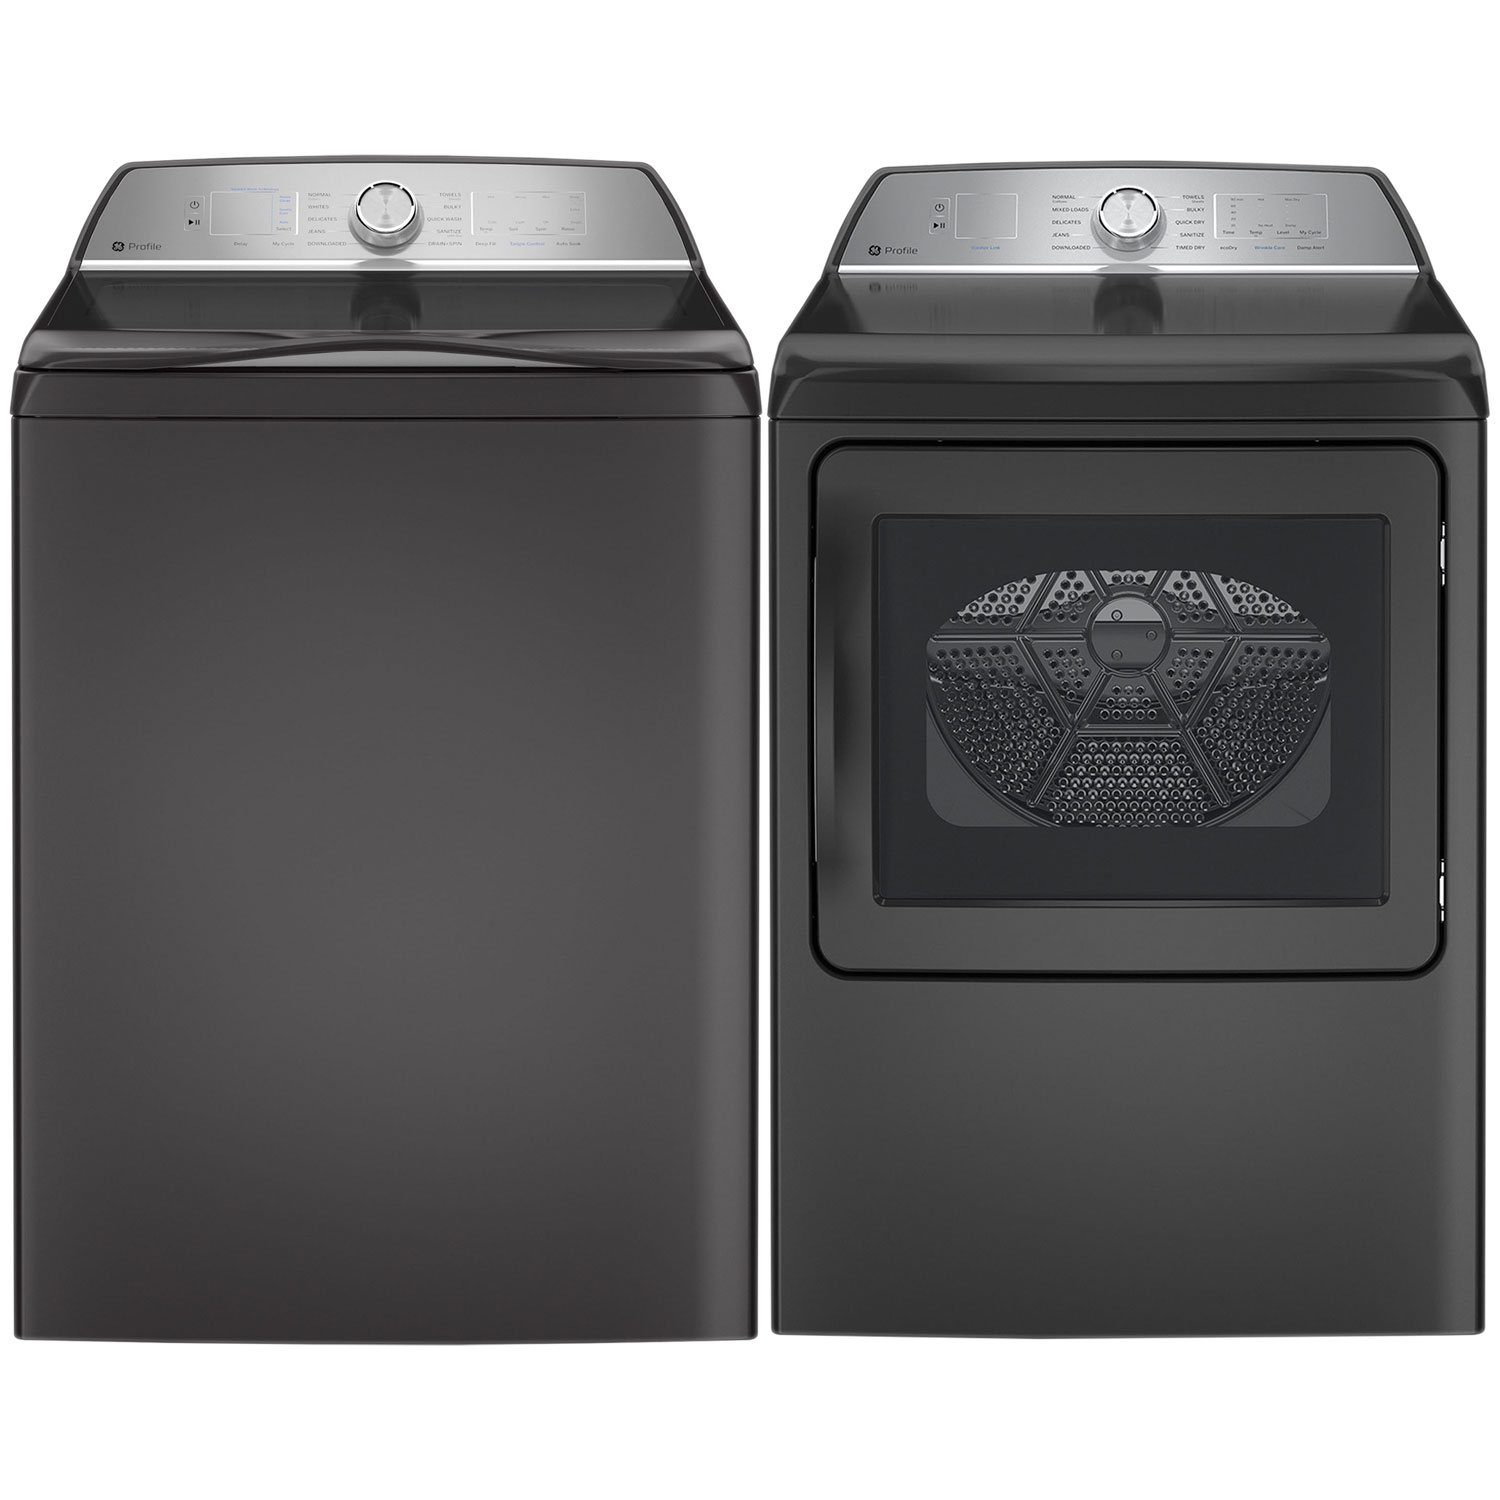 GE Profile 5.8 Cu. Ft. High Efficiency Top Load Washer & 7.4 Cu. Ft. Electric Dryer - Diamond Grey